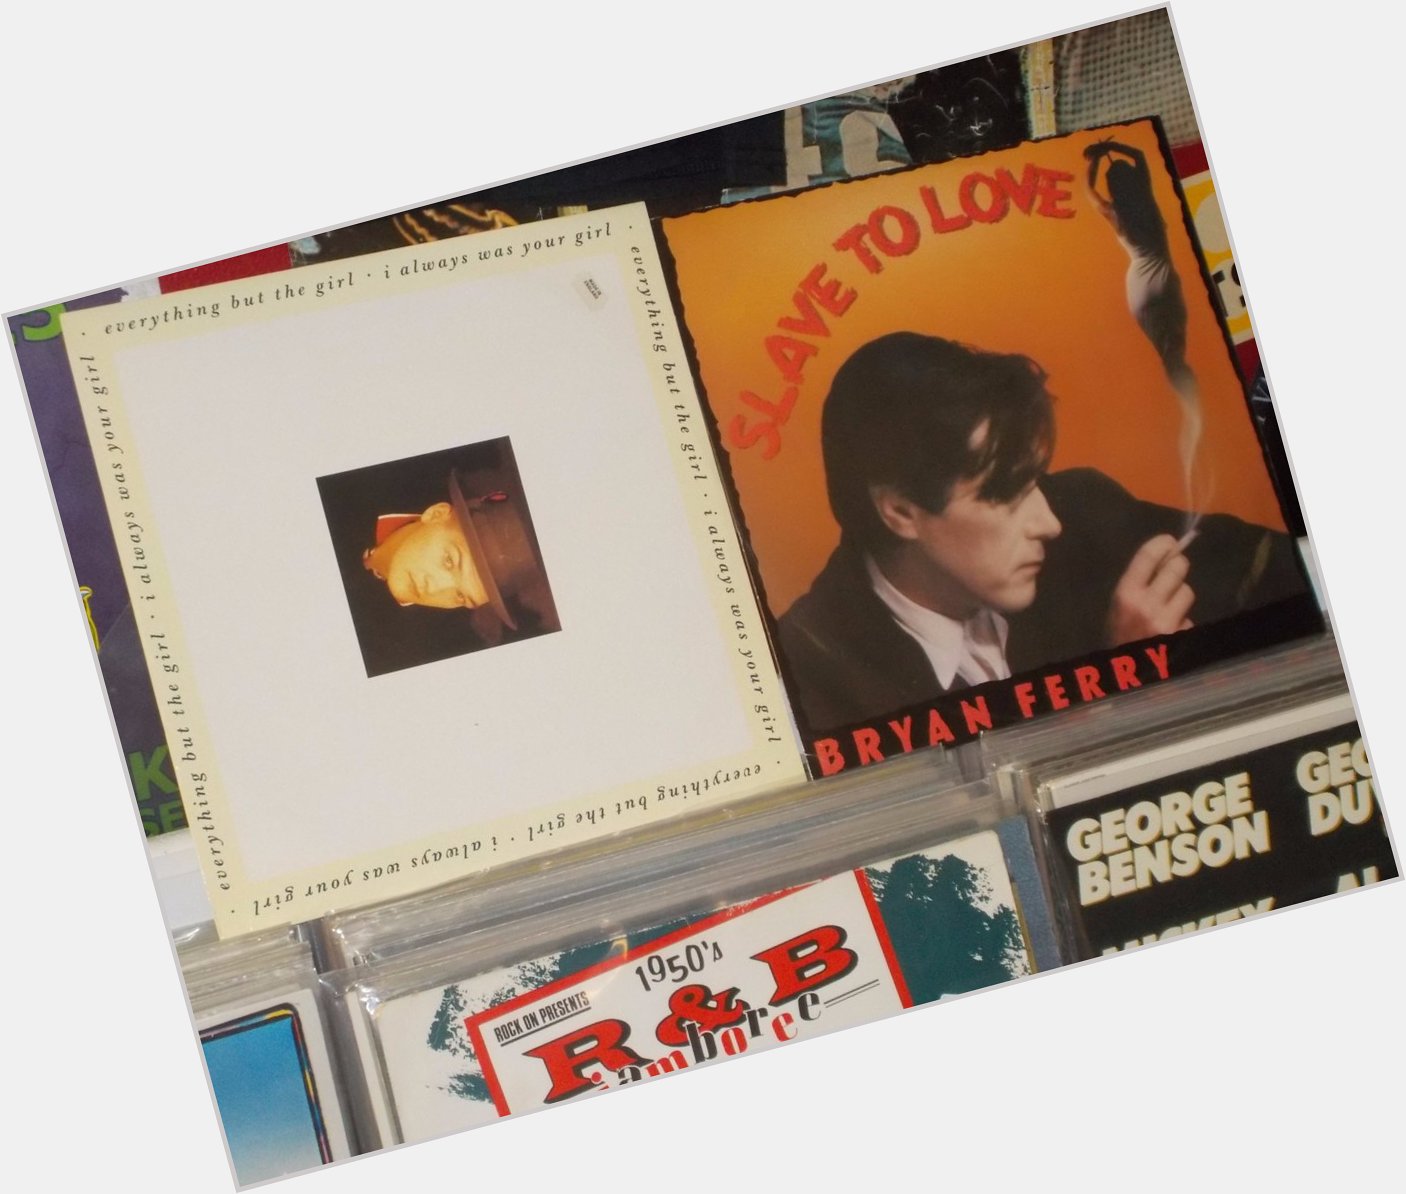 Happy Birthday to Tracey Thorn of Everything But The Girl & Bryan Ferry (Roxy Music) 